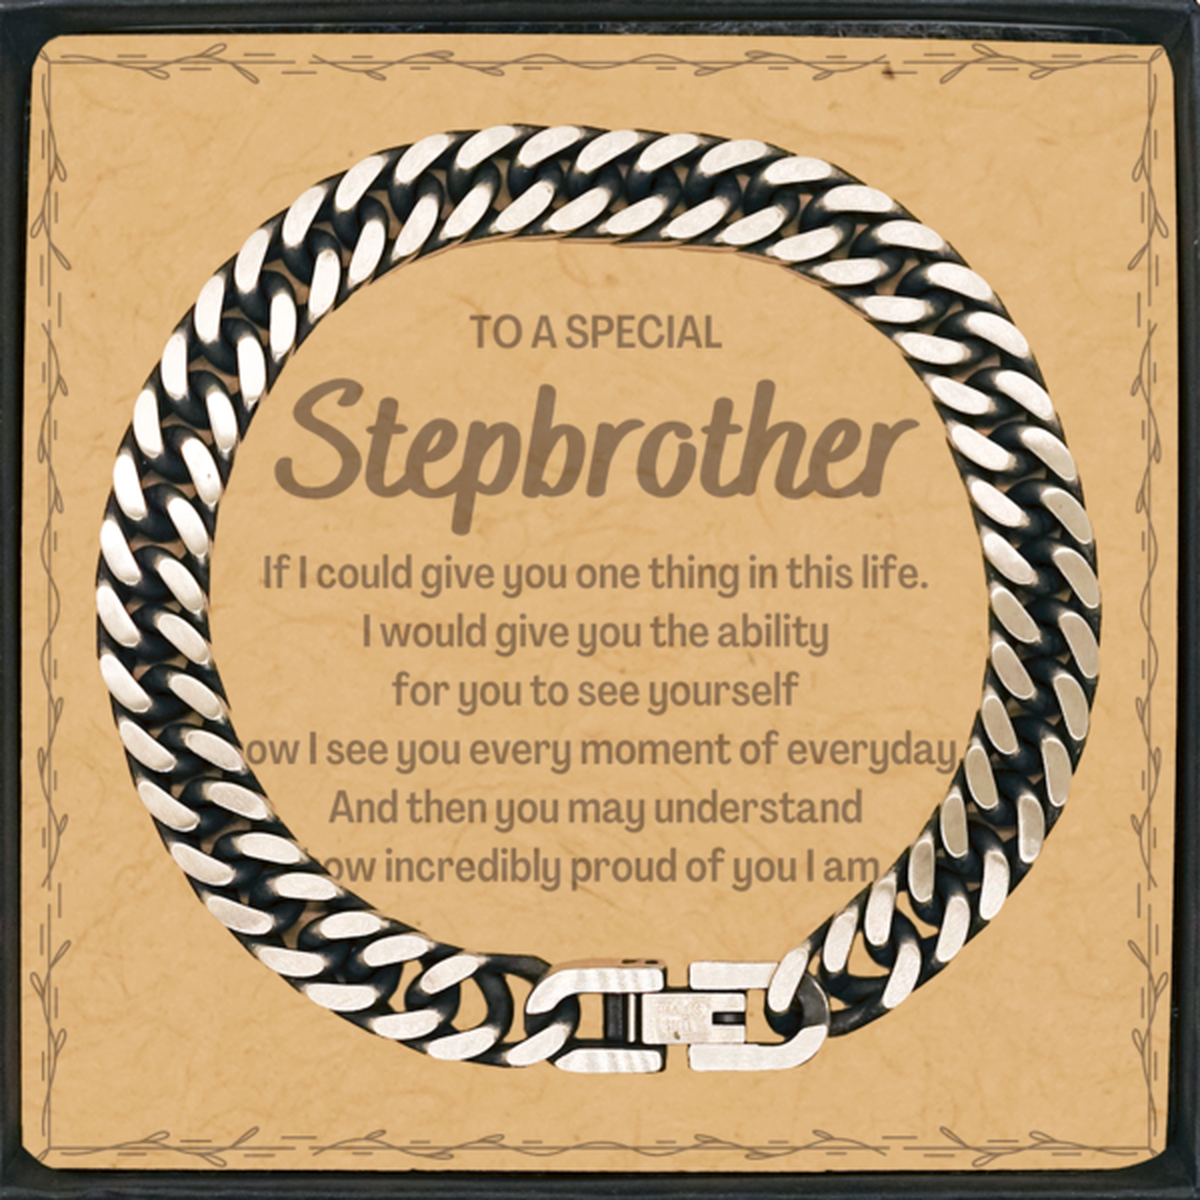 To My Stepbrother Cuban Link Chain Bracelet, Gifts For Stepbrother Message Card, Inspirational Gifts for Christmas Birthday, Epic Gifts for Stepbrother To A Special Stepbrother how incredibly proud of you I am